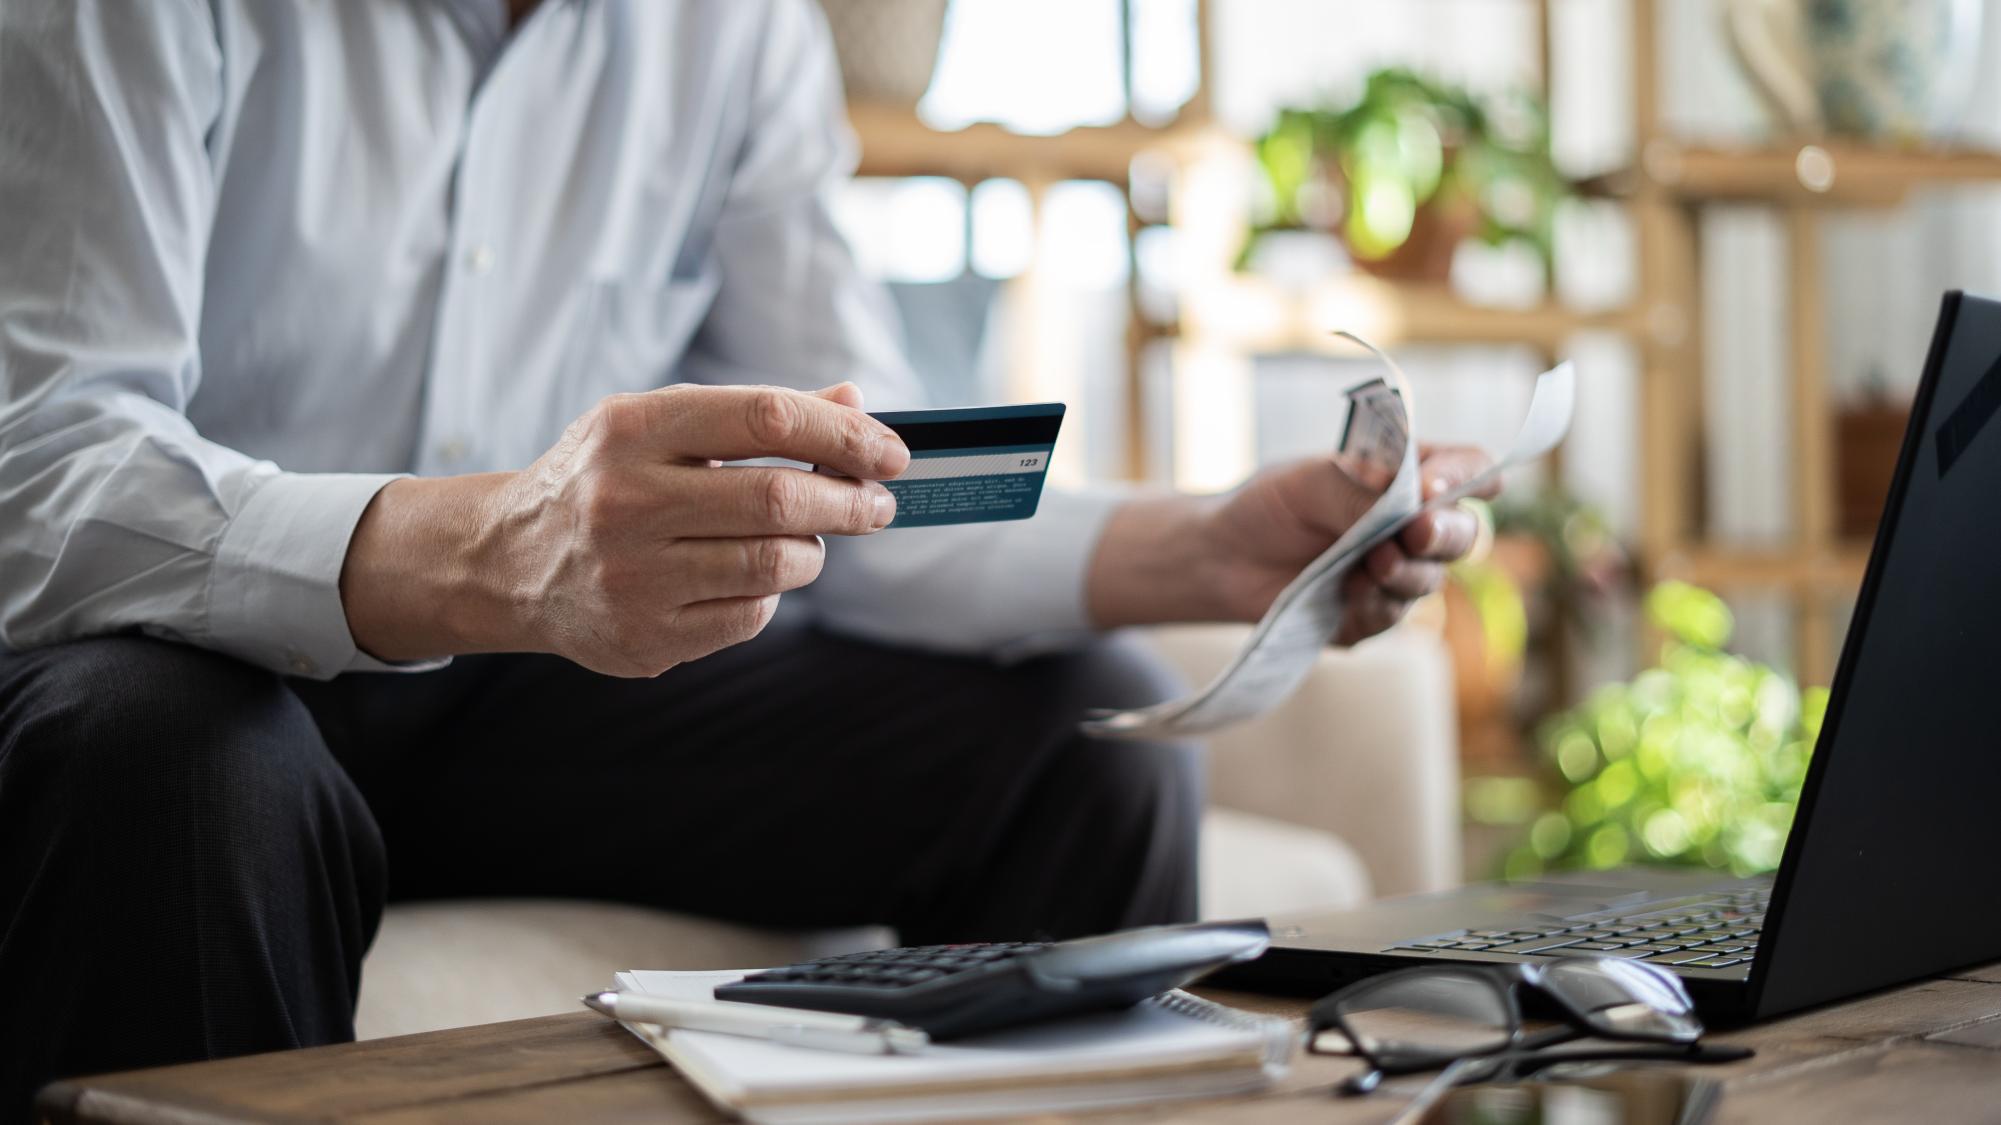 A person holds their card in one hand and papers in the other. Impulsive spending can lead to debt, bad credit and other issues. (Getty Images)